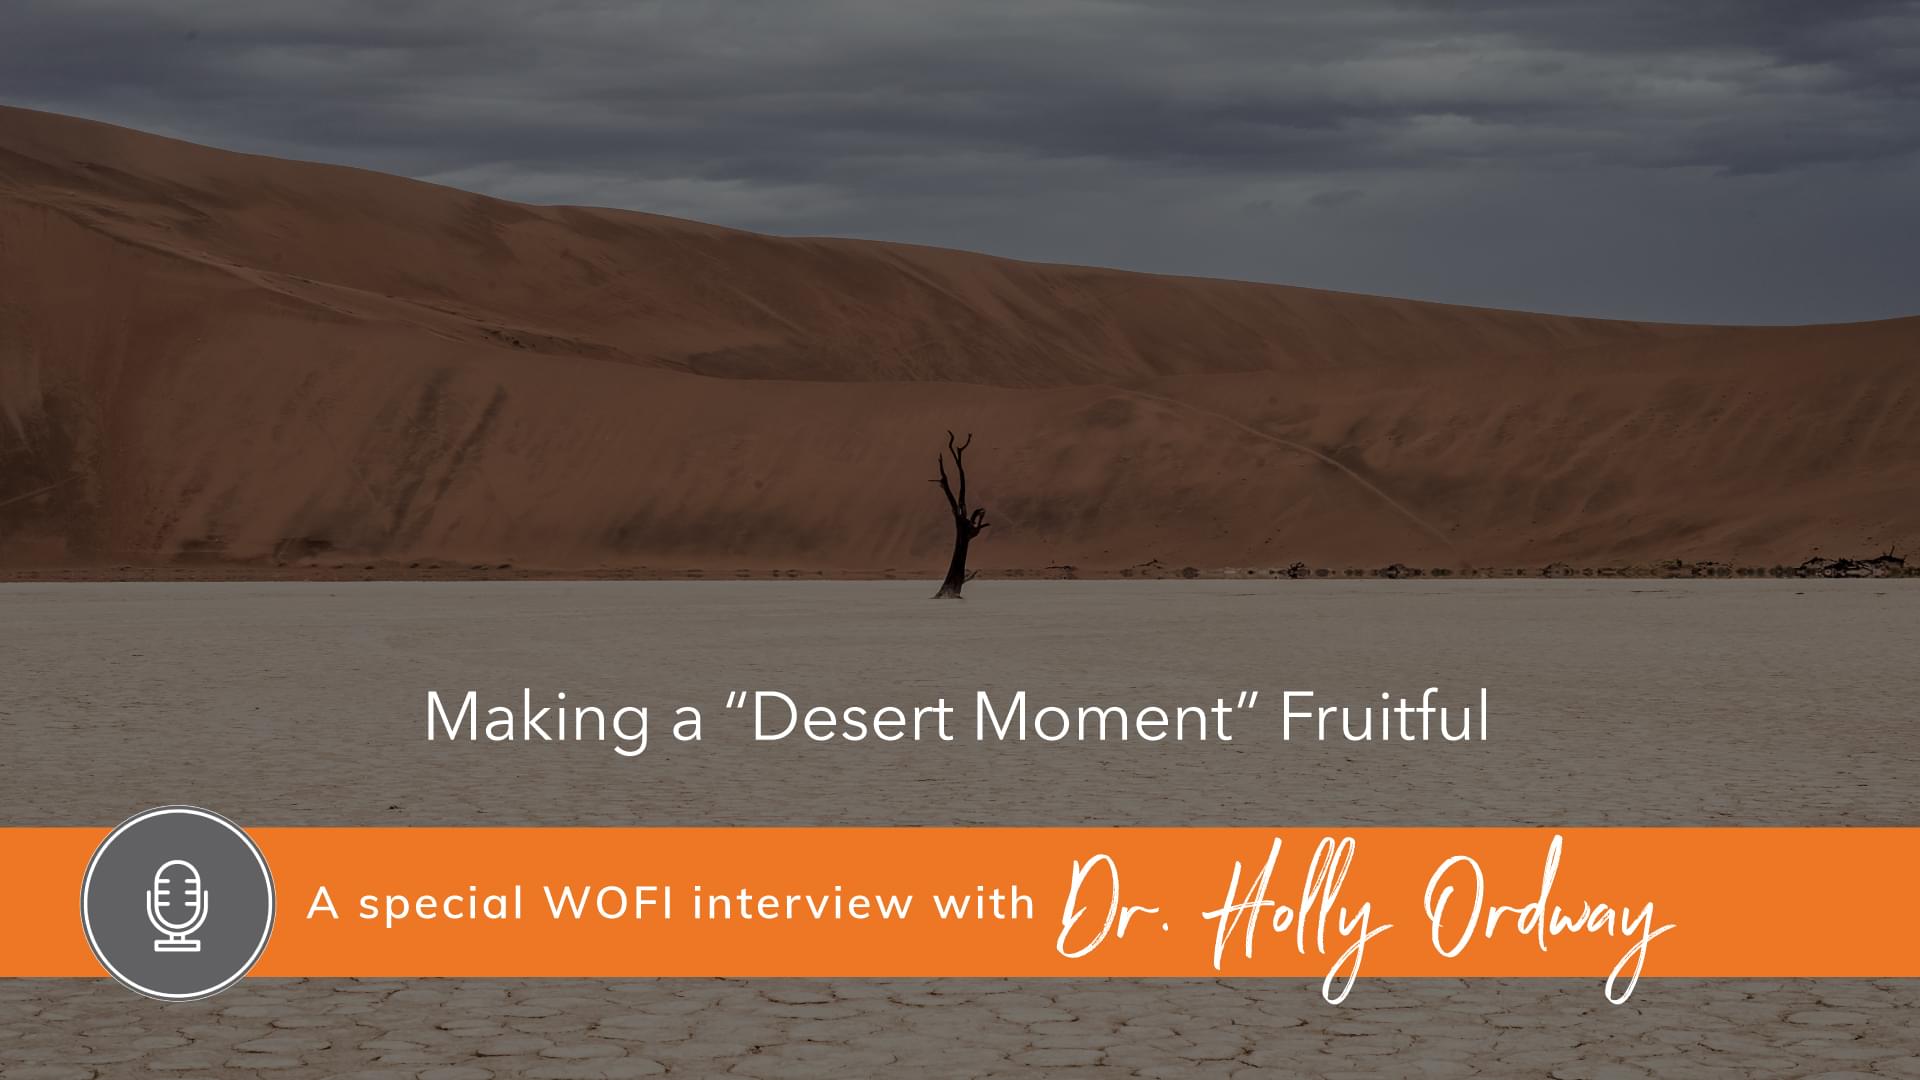 An Interview with Dr. Holly Ordway